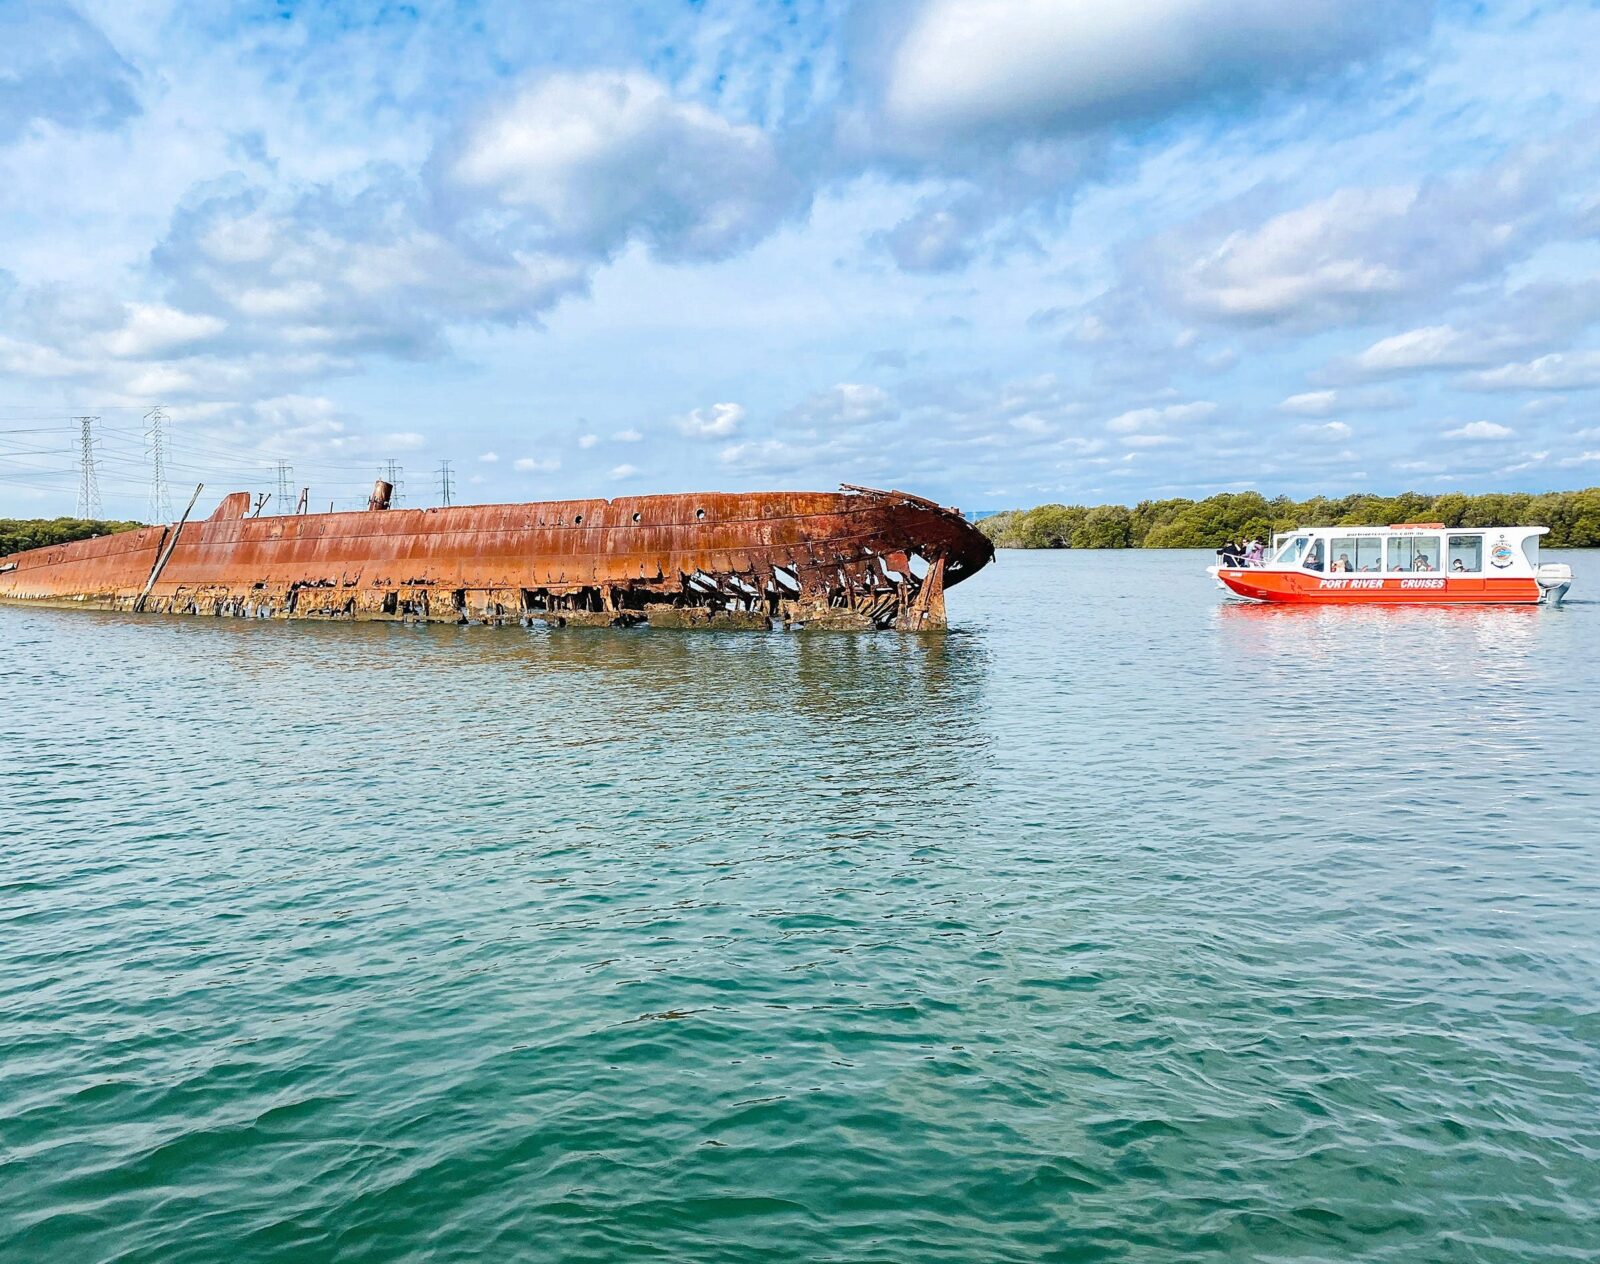 The Port River Cruises vessel approaches a half-sunken ship